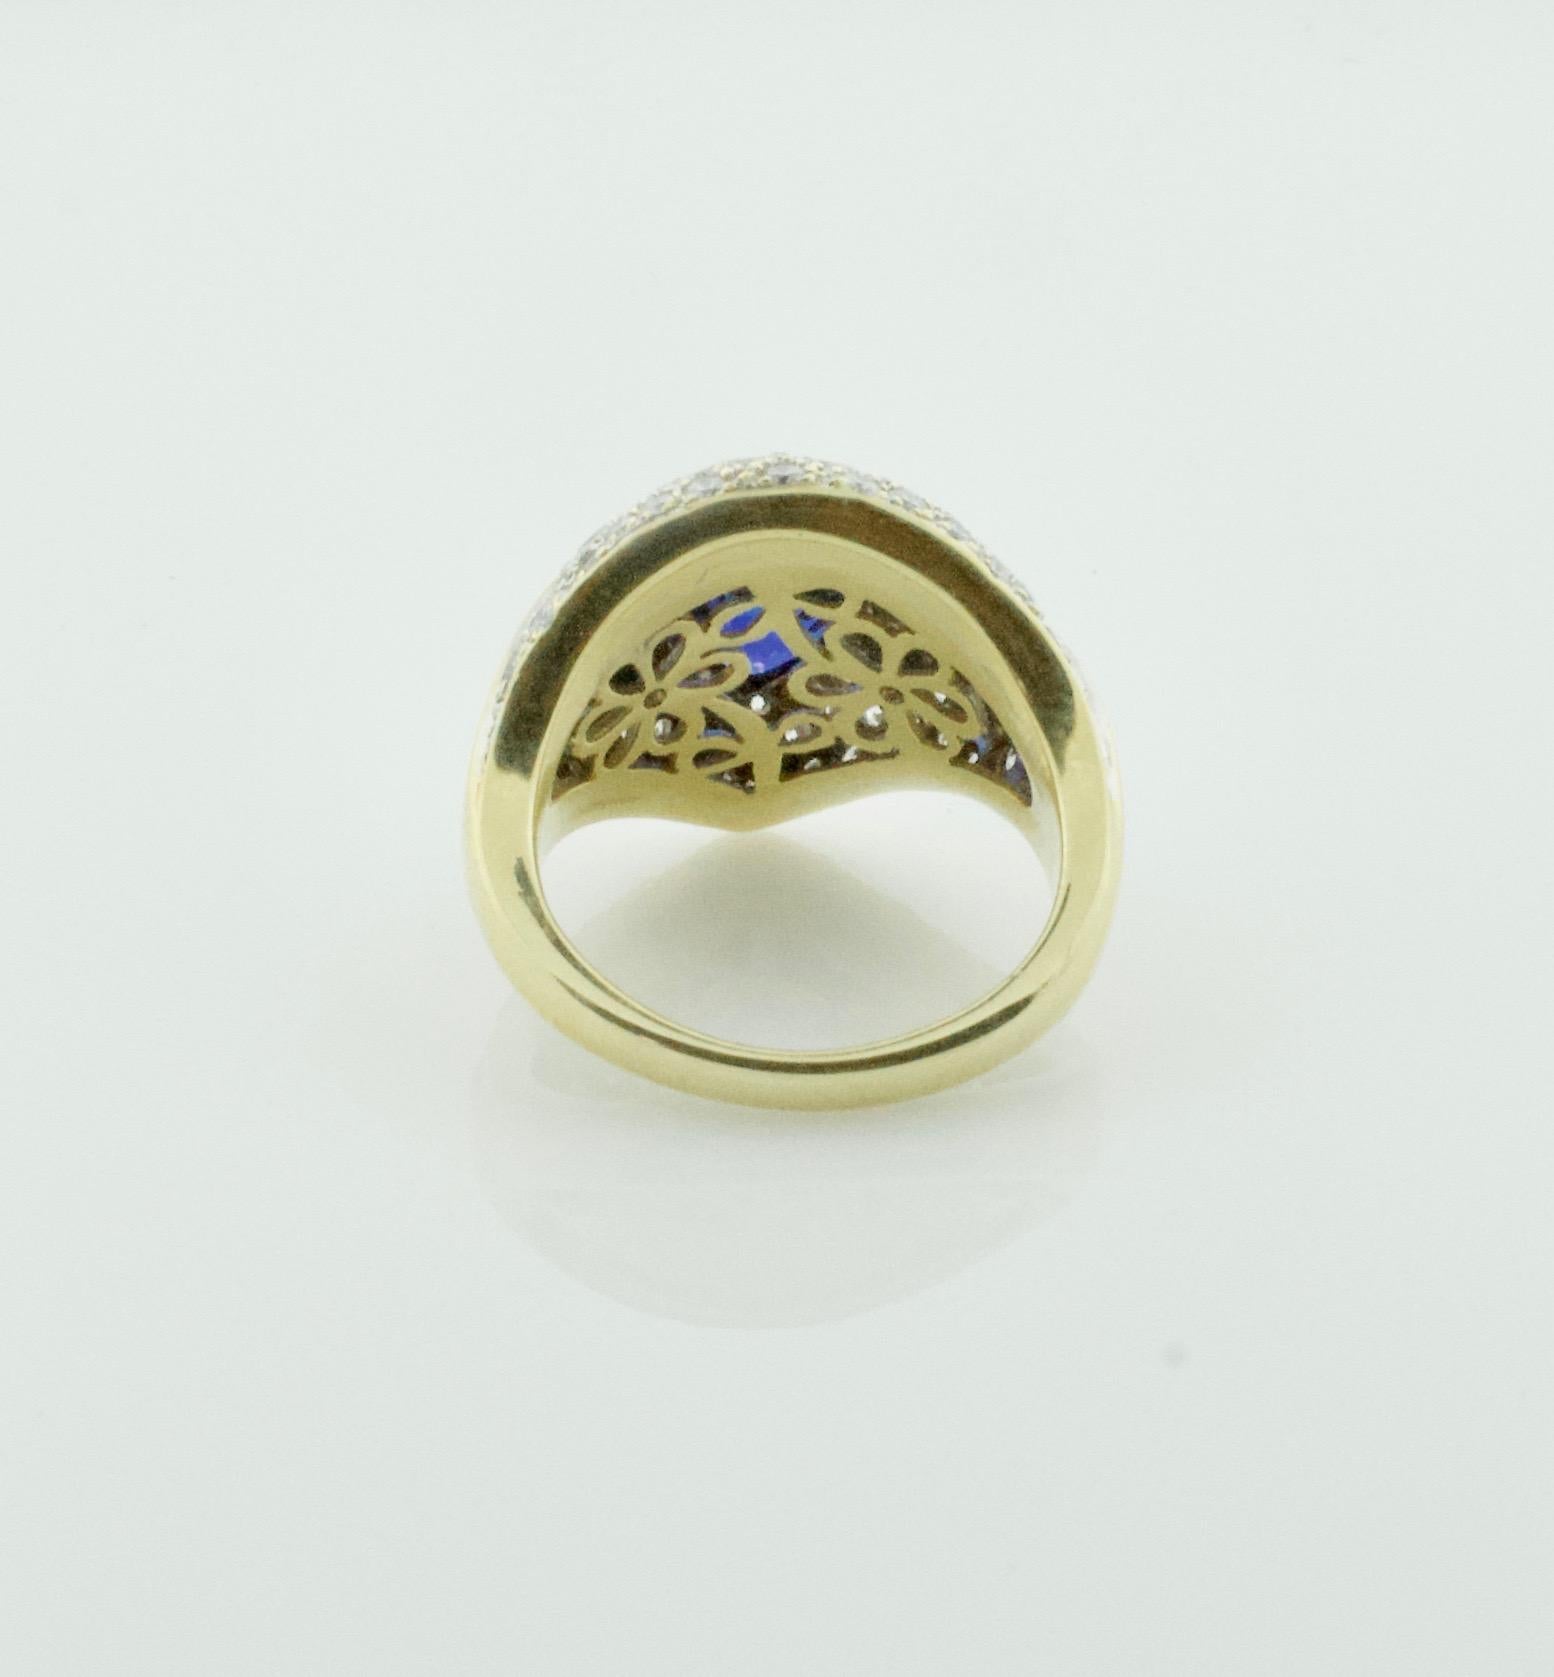 Breathtaking Sapphire and Pave' Diamond Ring in 18 Karat Yellow Gold In Excellent Condition For Sale In Wailea, HI